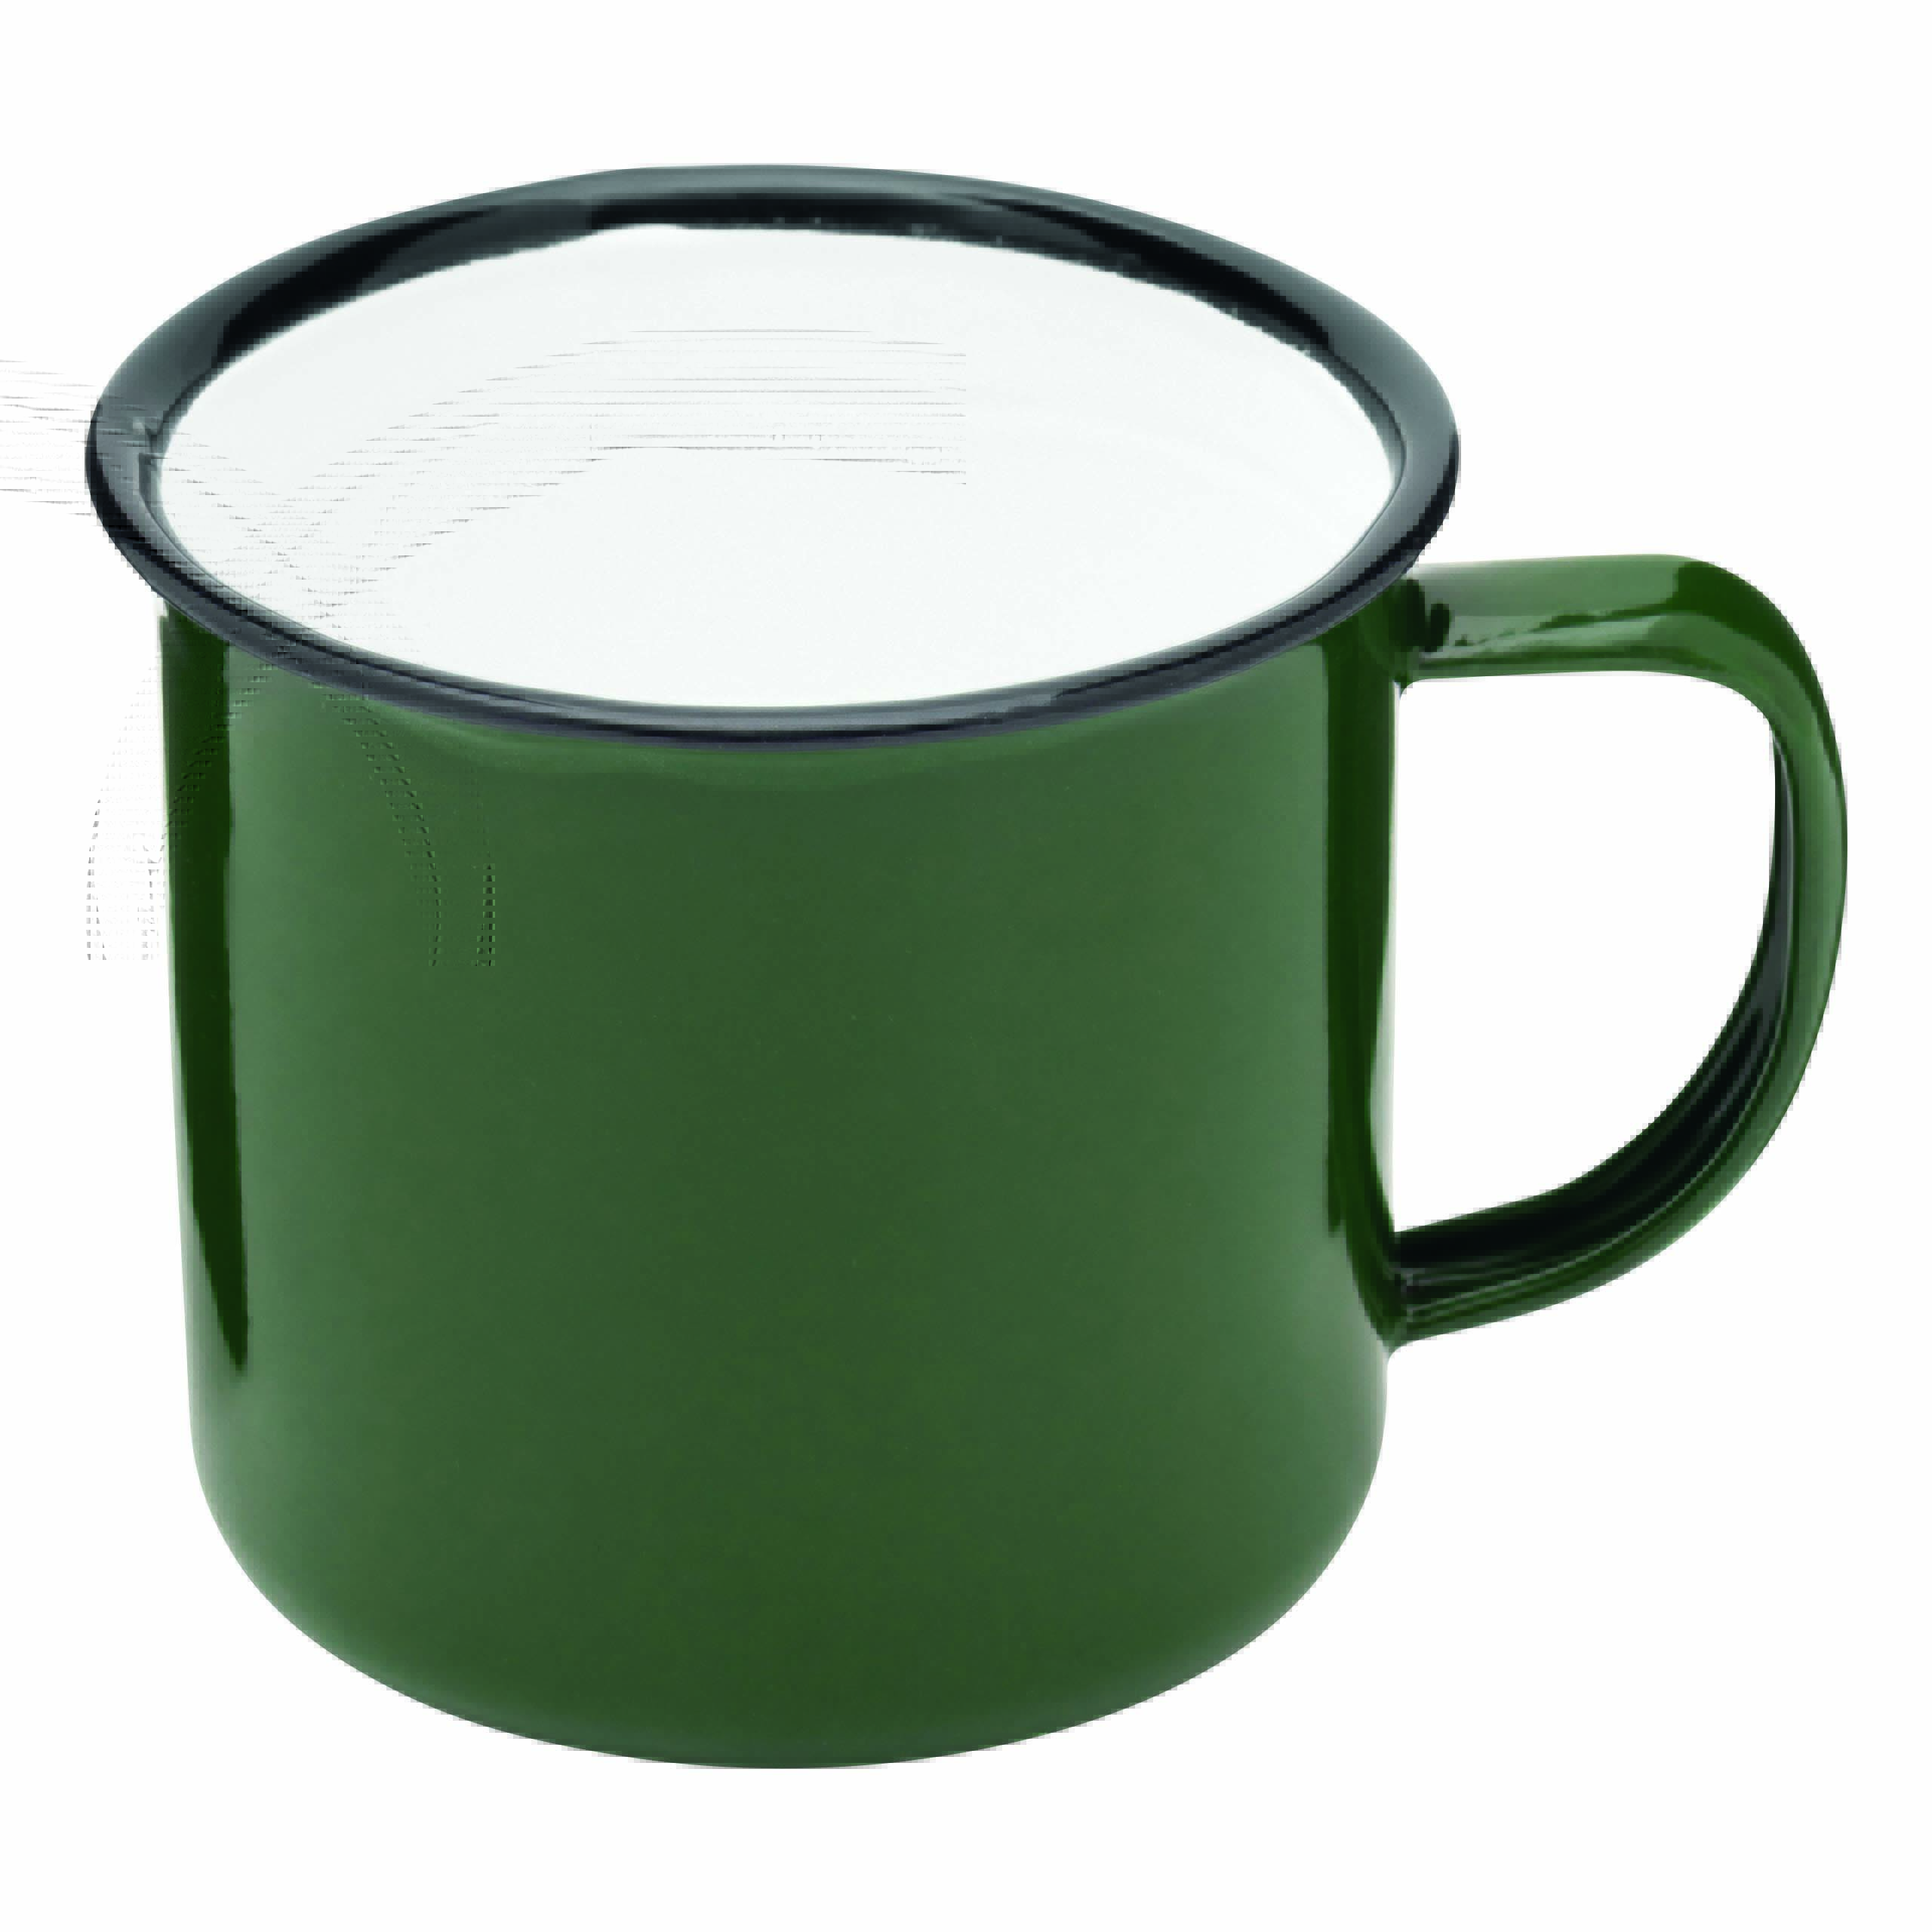 Emaille Becher RETRO CUP 56-0304424